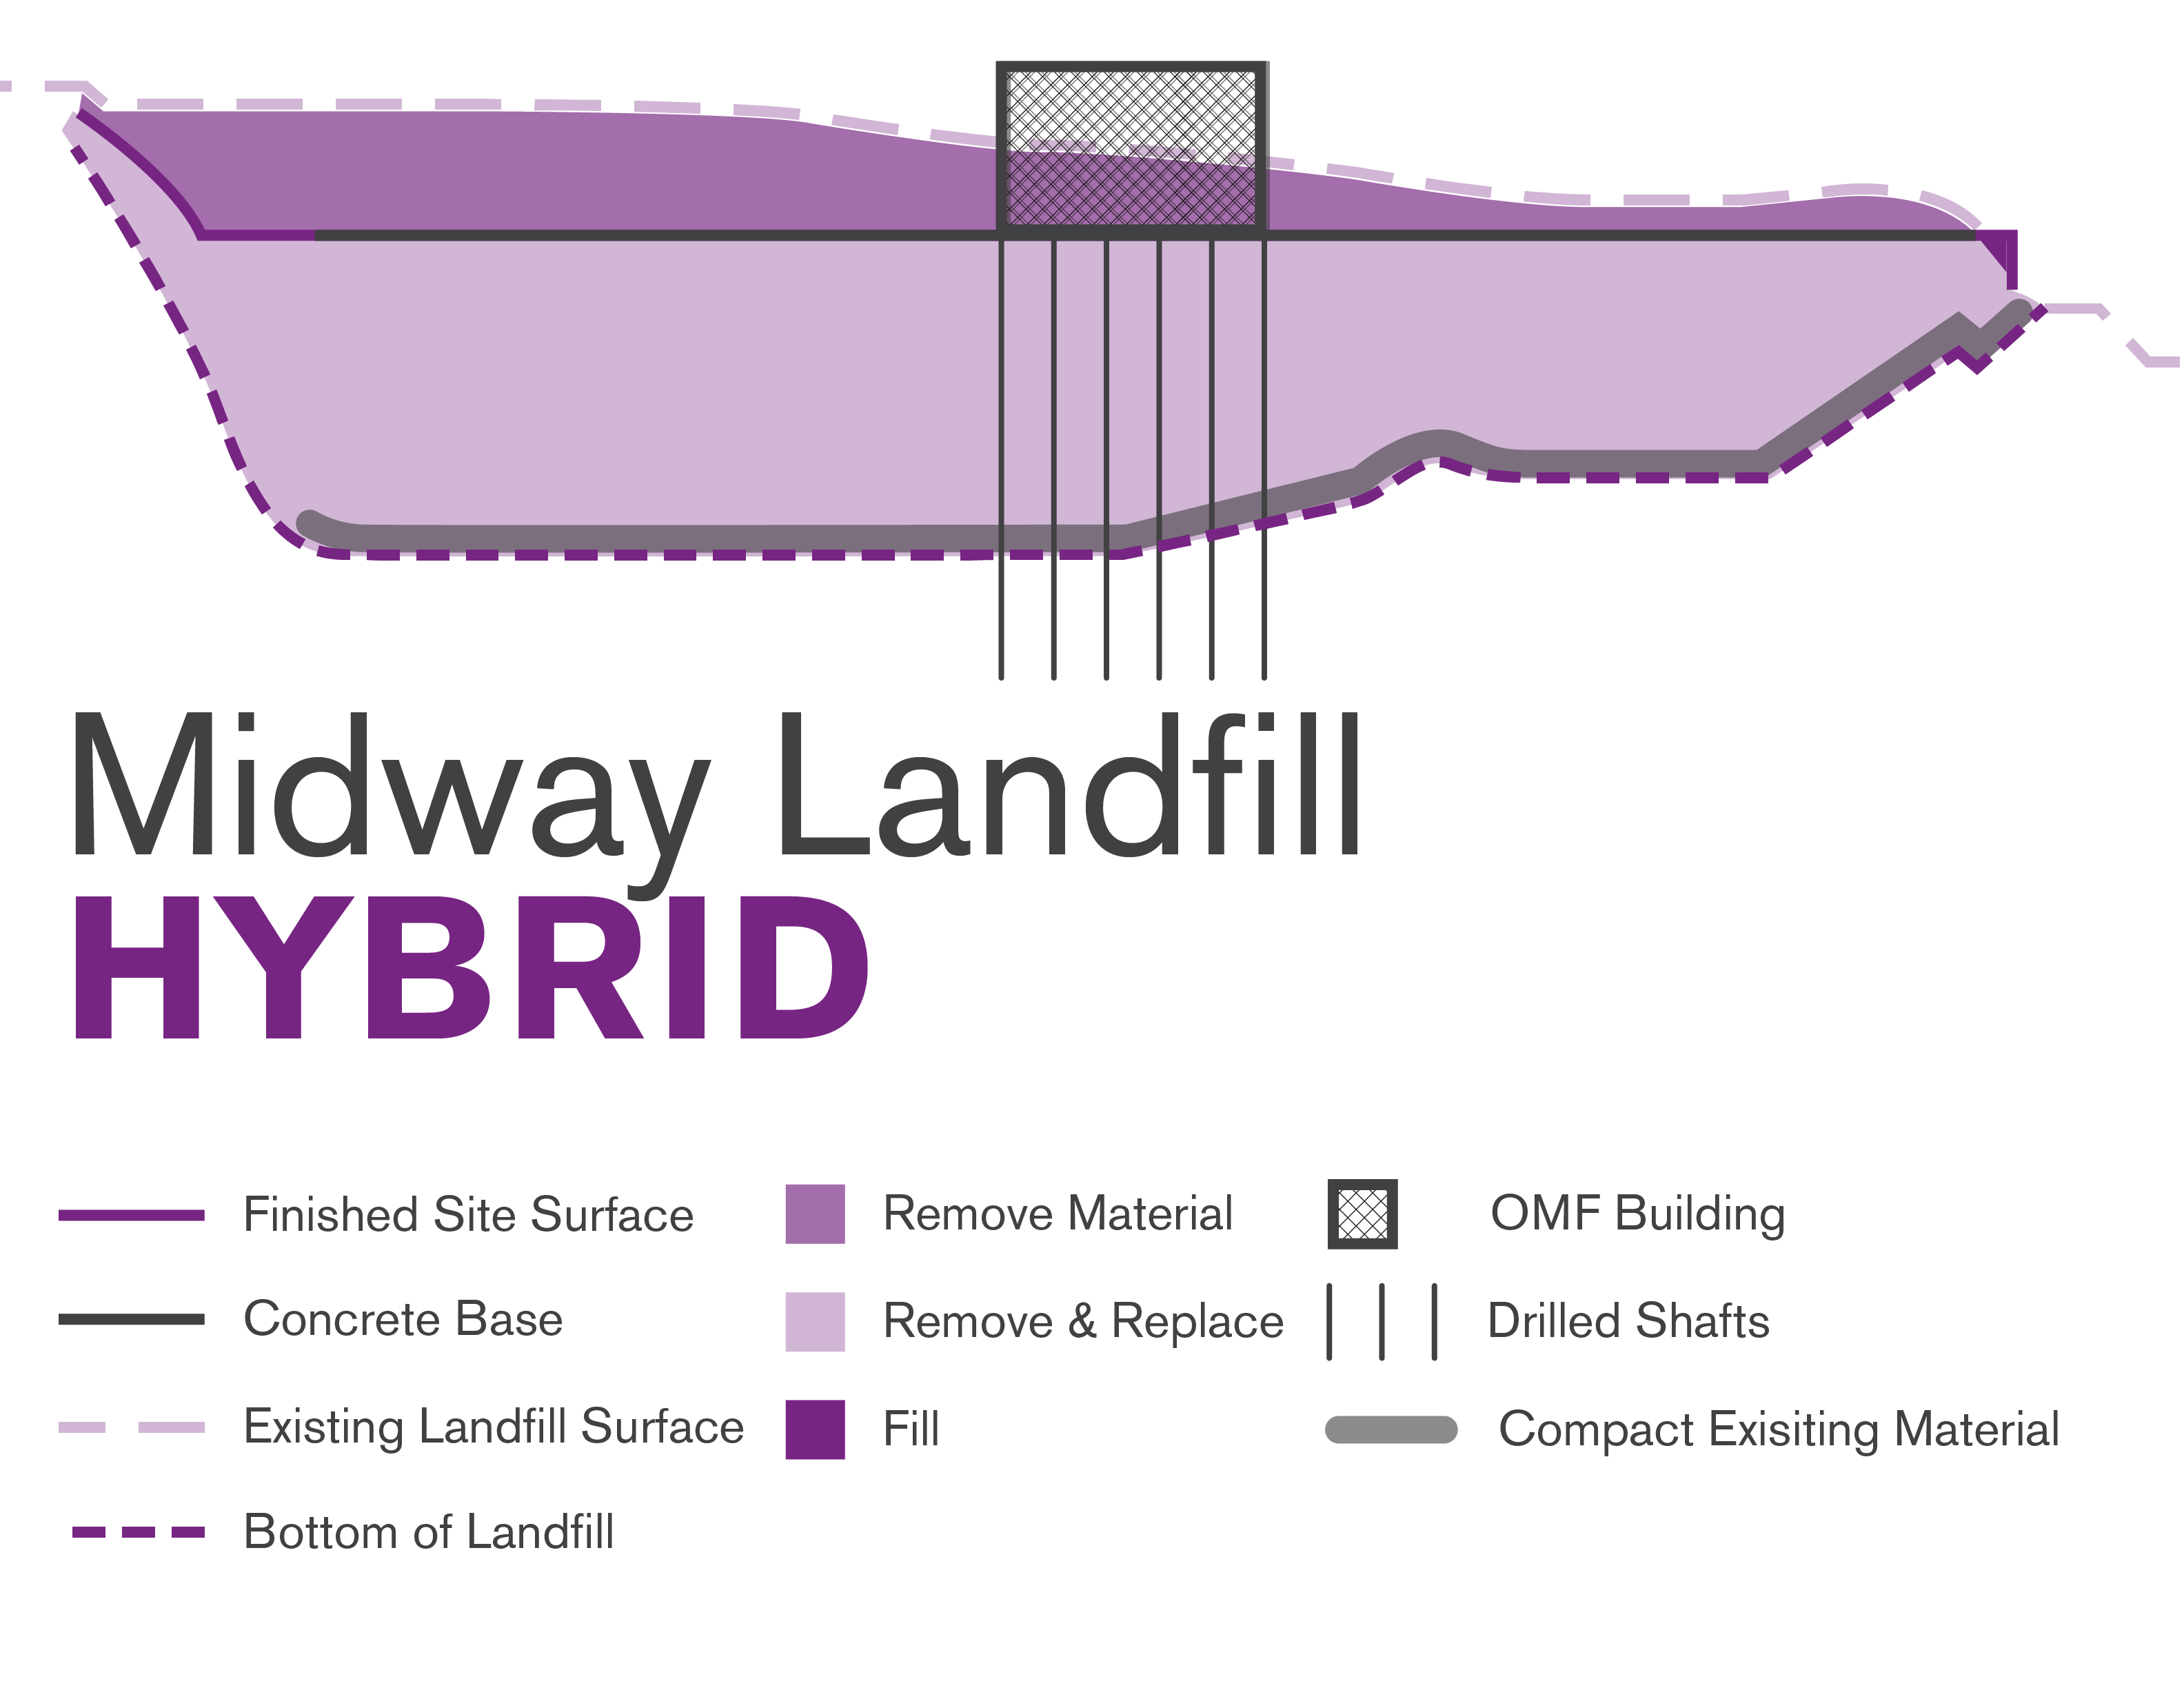 Graphic illustrating the Midway Landfill Hybrid construction method.